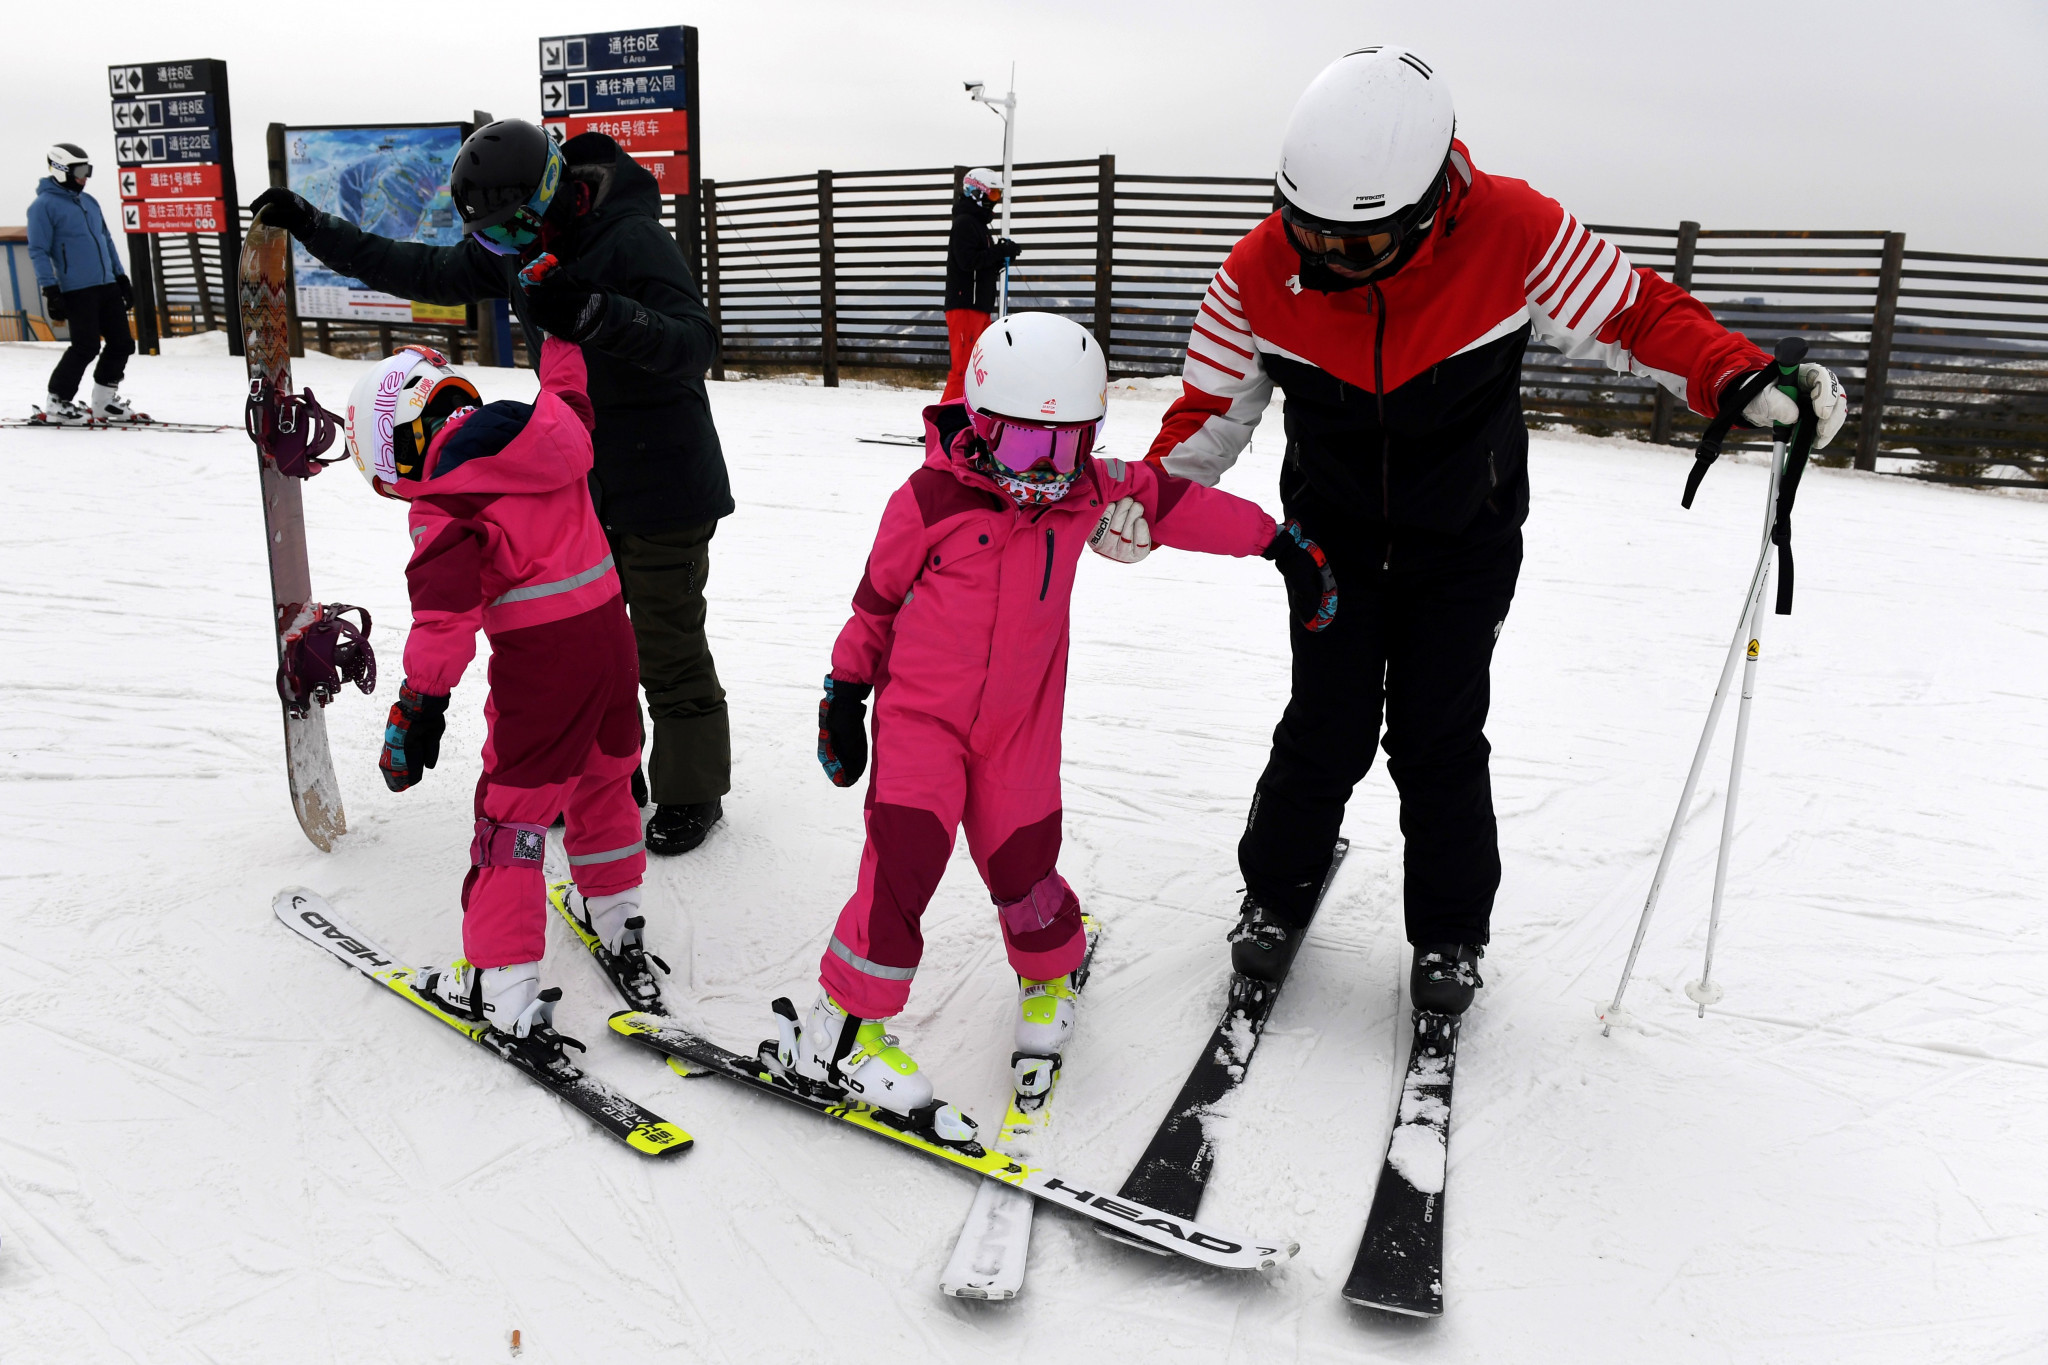 Ecole Française de Ski has opened a ski academy with Club Med to help capitalise on the opportunity offered by Beijing 2022 ©Getty Images